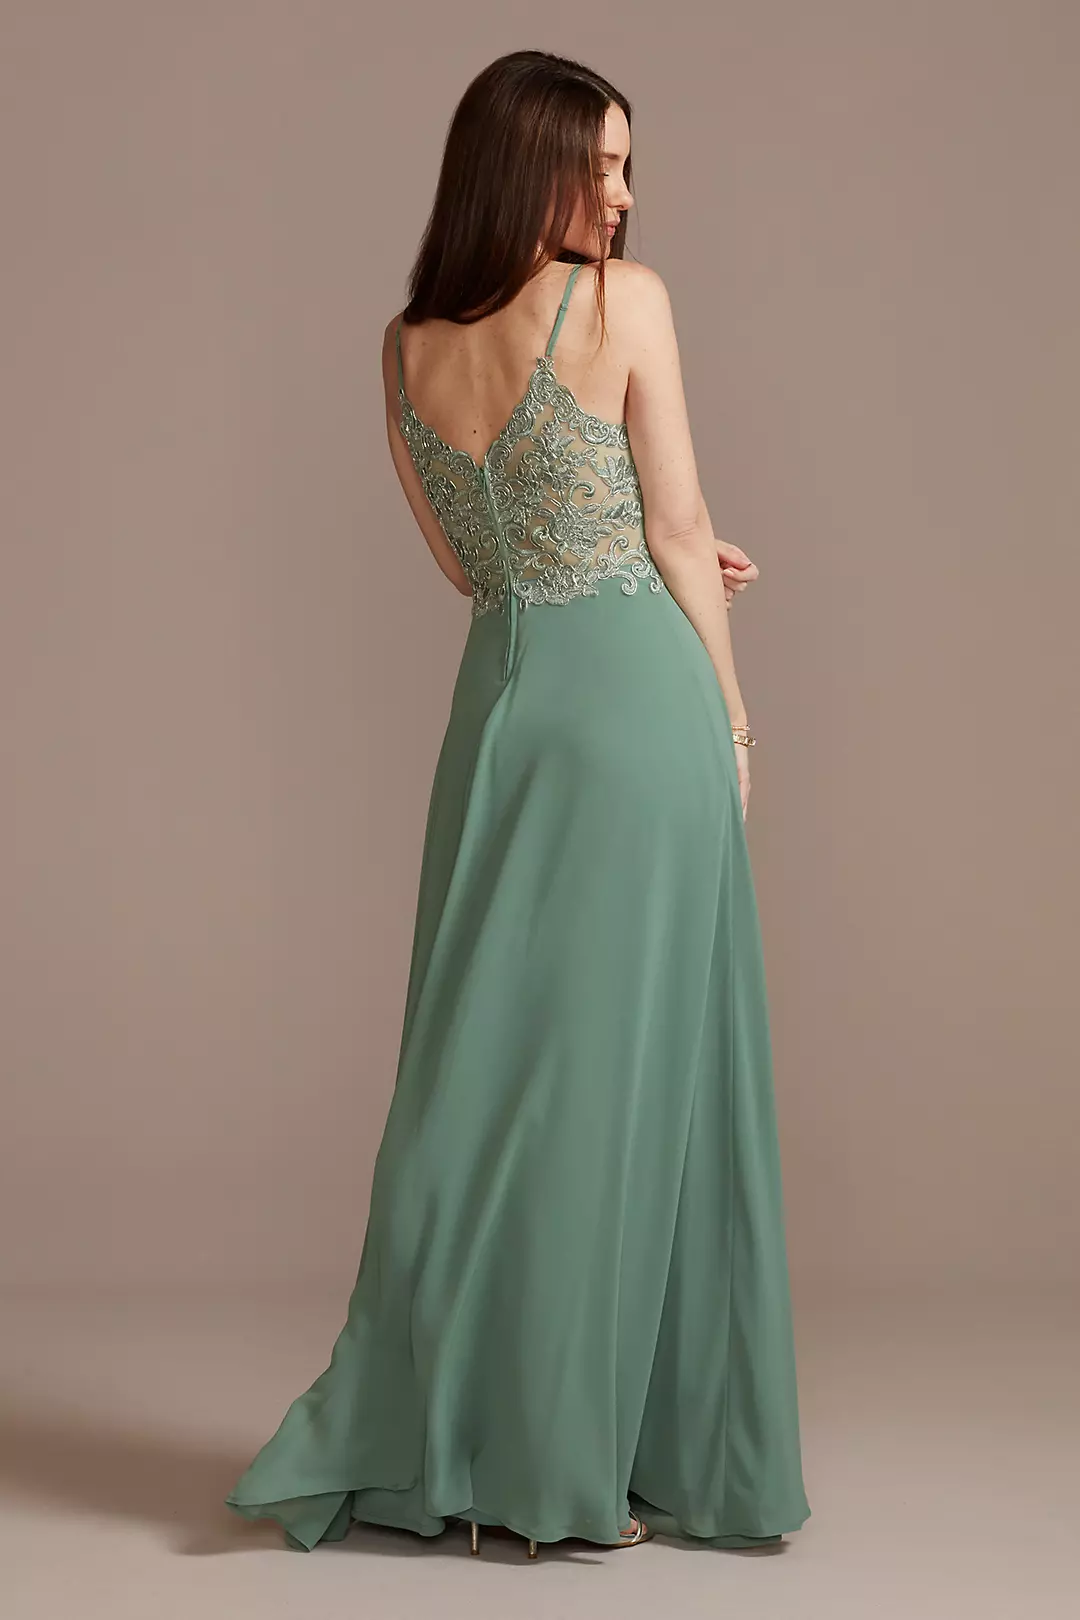 Corded Lace Back Dress with Chiffon Overlay Image 2